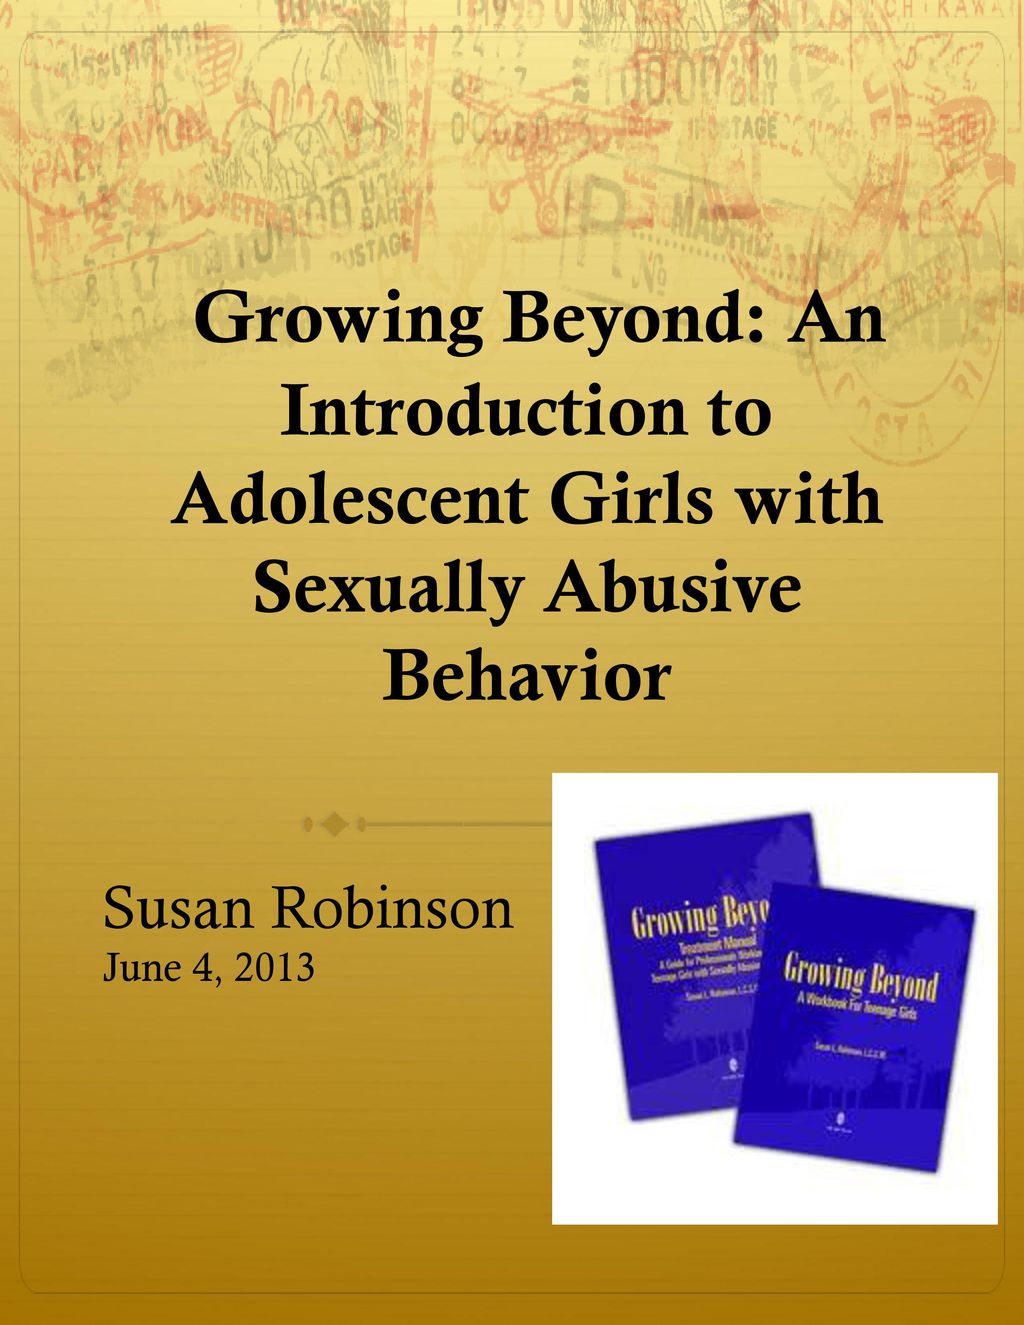 6/9/2018 Growing Beyond: An Introduction to Adolescent Girls with Sexually Abusive Behavior. Susan Robinson.